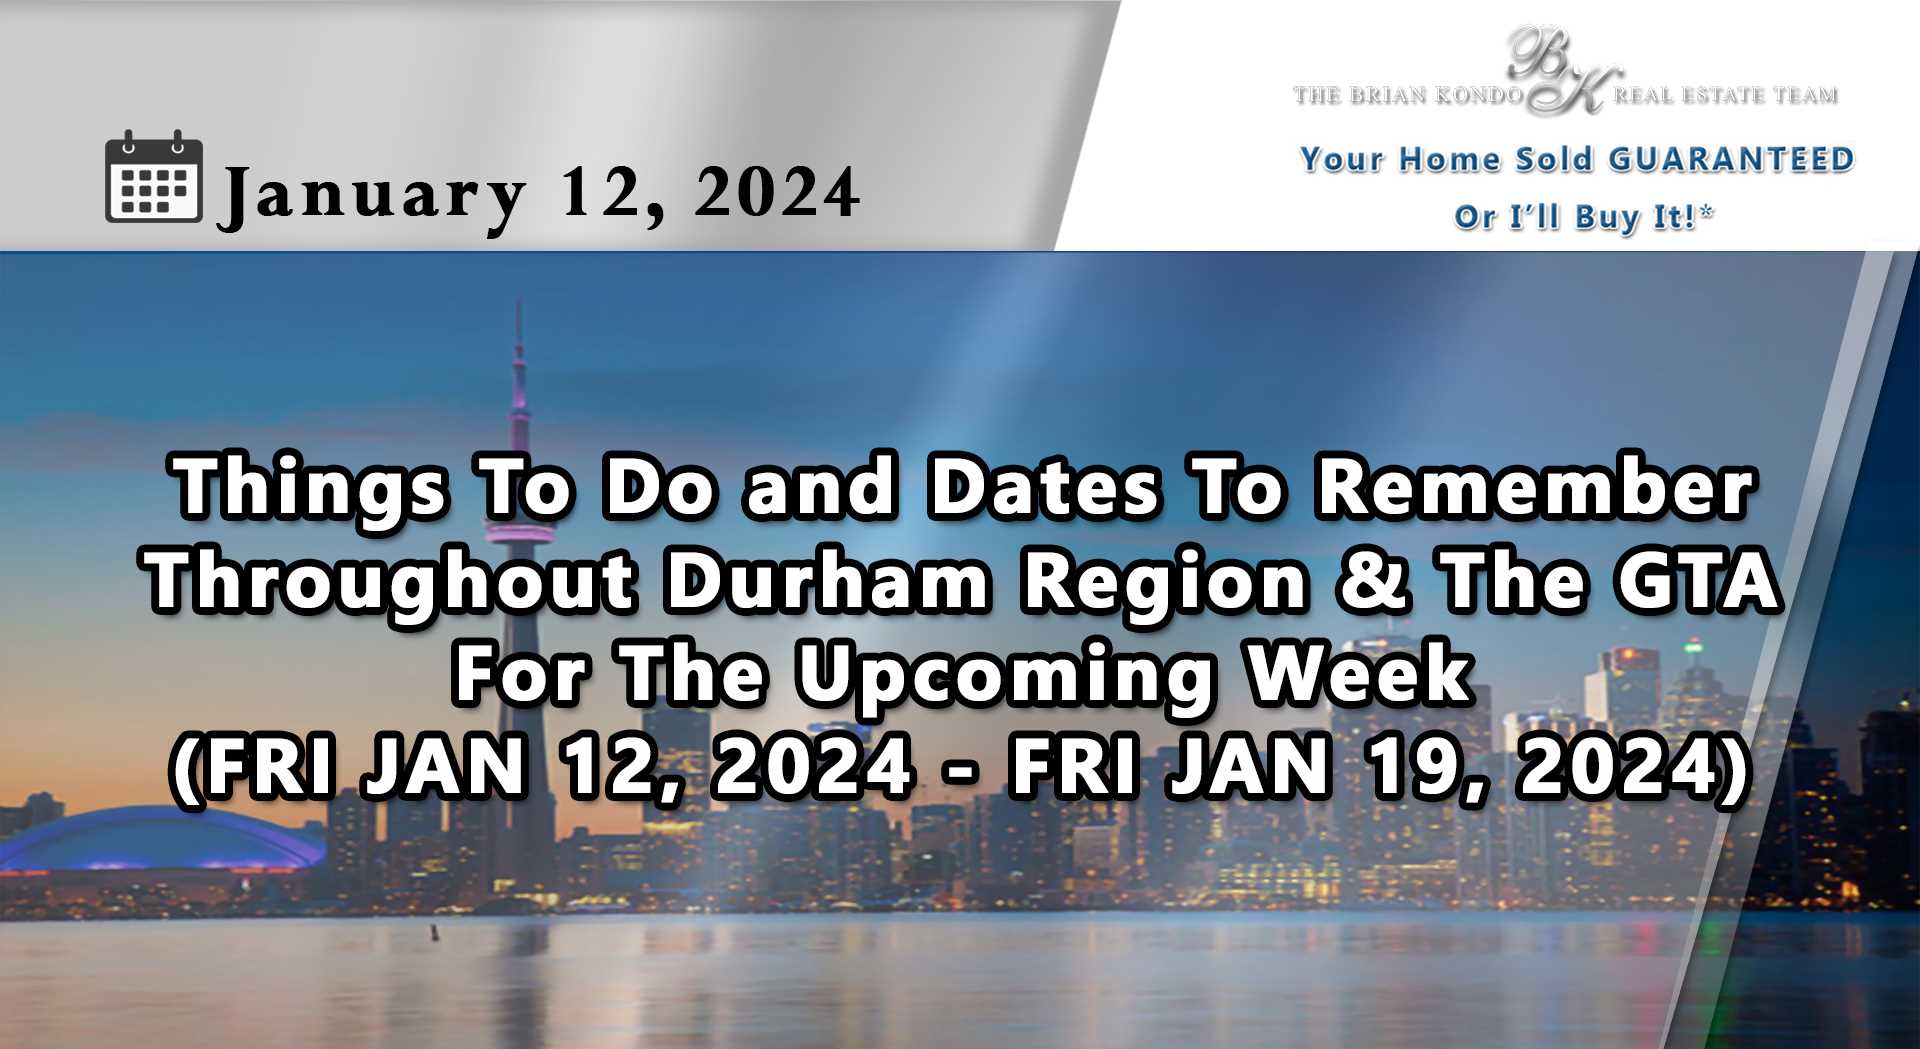 Things To Do and Dates To Remember Throughout Durham Region and The GTA For The Upcoming Week (FRI JAN 12, 2024 - FRI JAN 19, 2024)